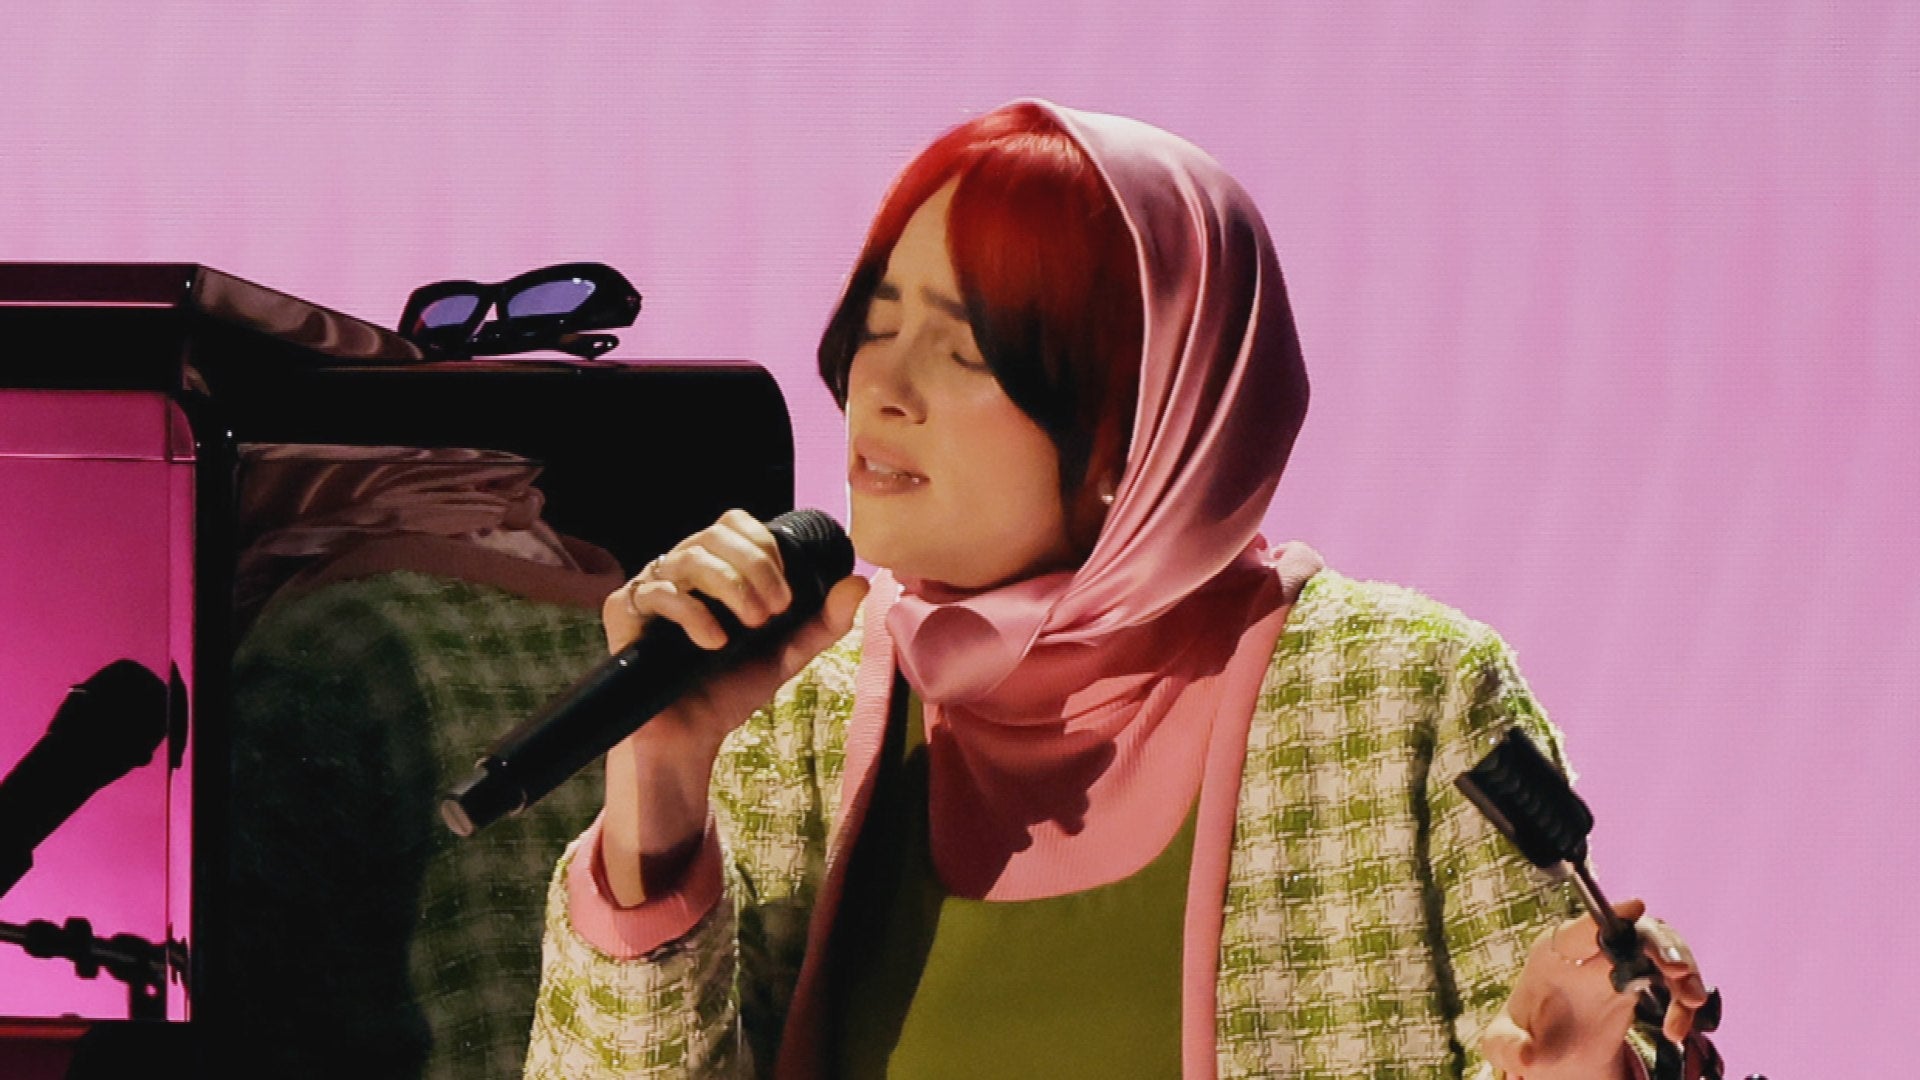 GRAMMYs: Billie Eilish Gives Emotional 'What Was I Made For?' Performance